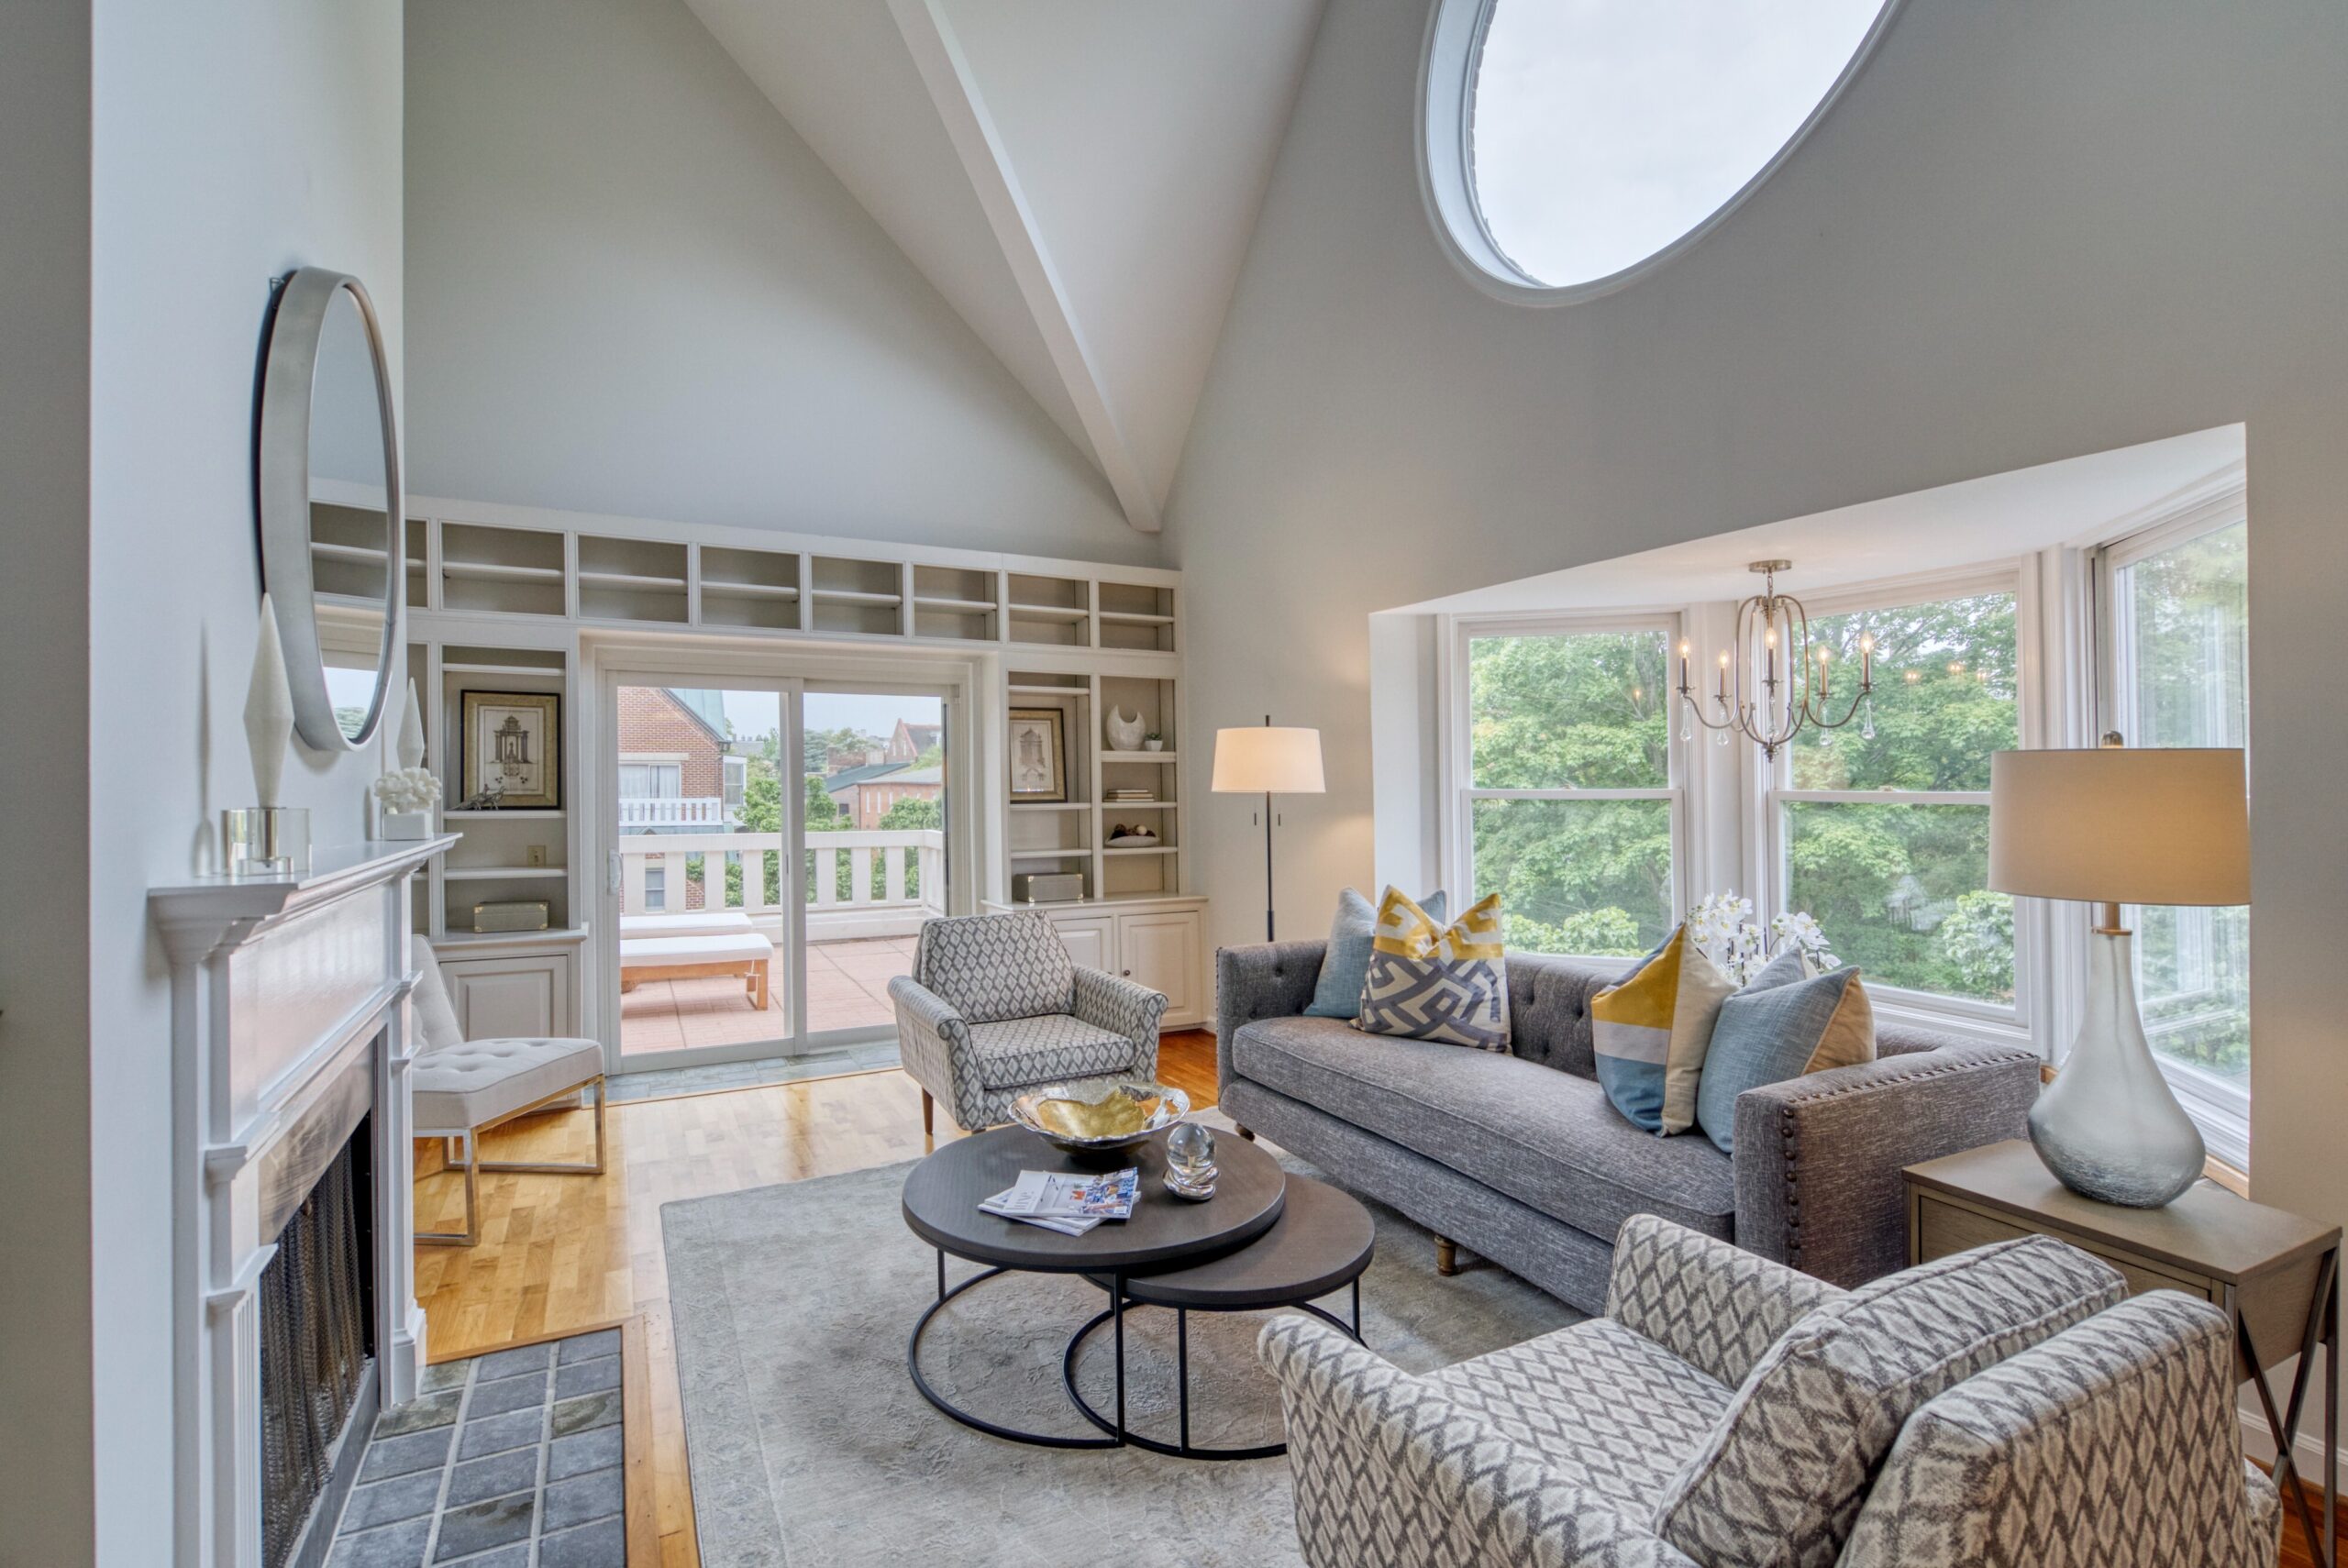 Professional interior photo of 125 N Lee St #401, Alexandria, VA - showing the living room with vaulted ceiling, round window over large window nook, built-in bookshelves at the far wall before the balcony